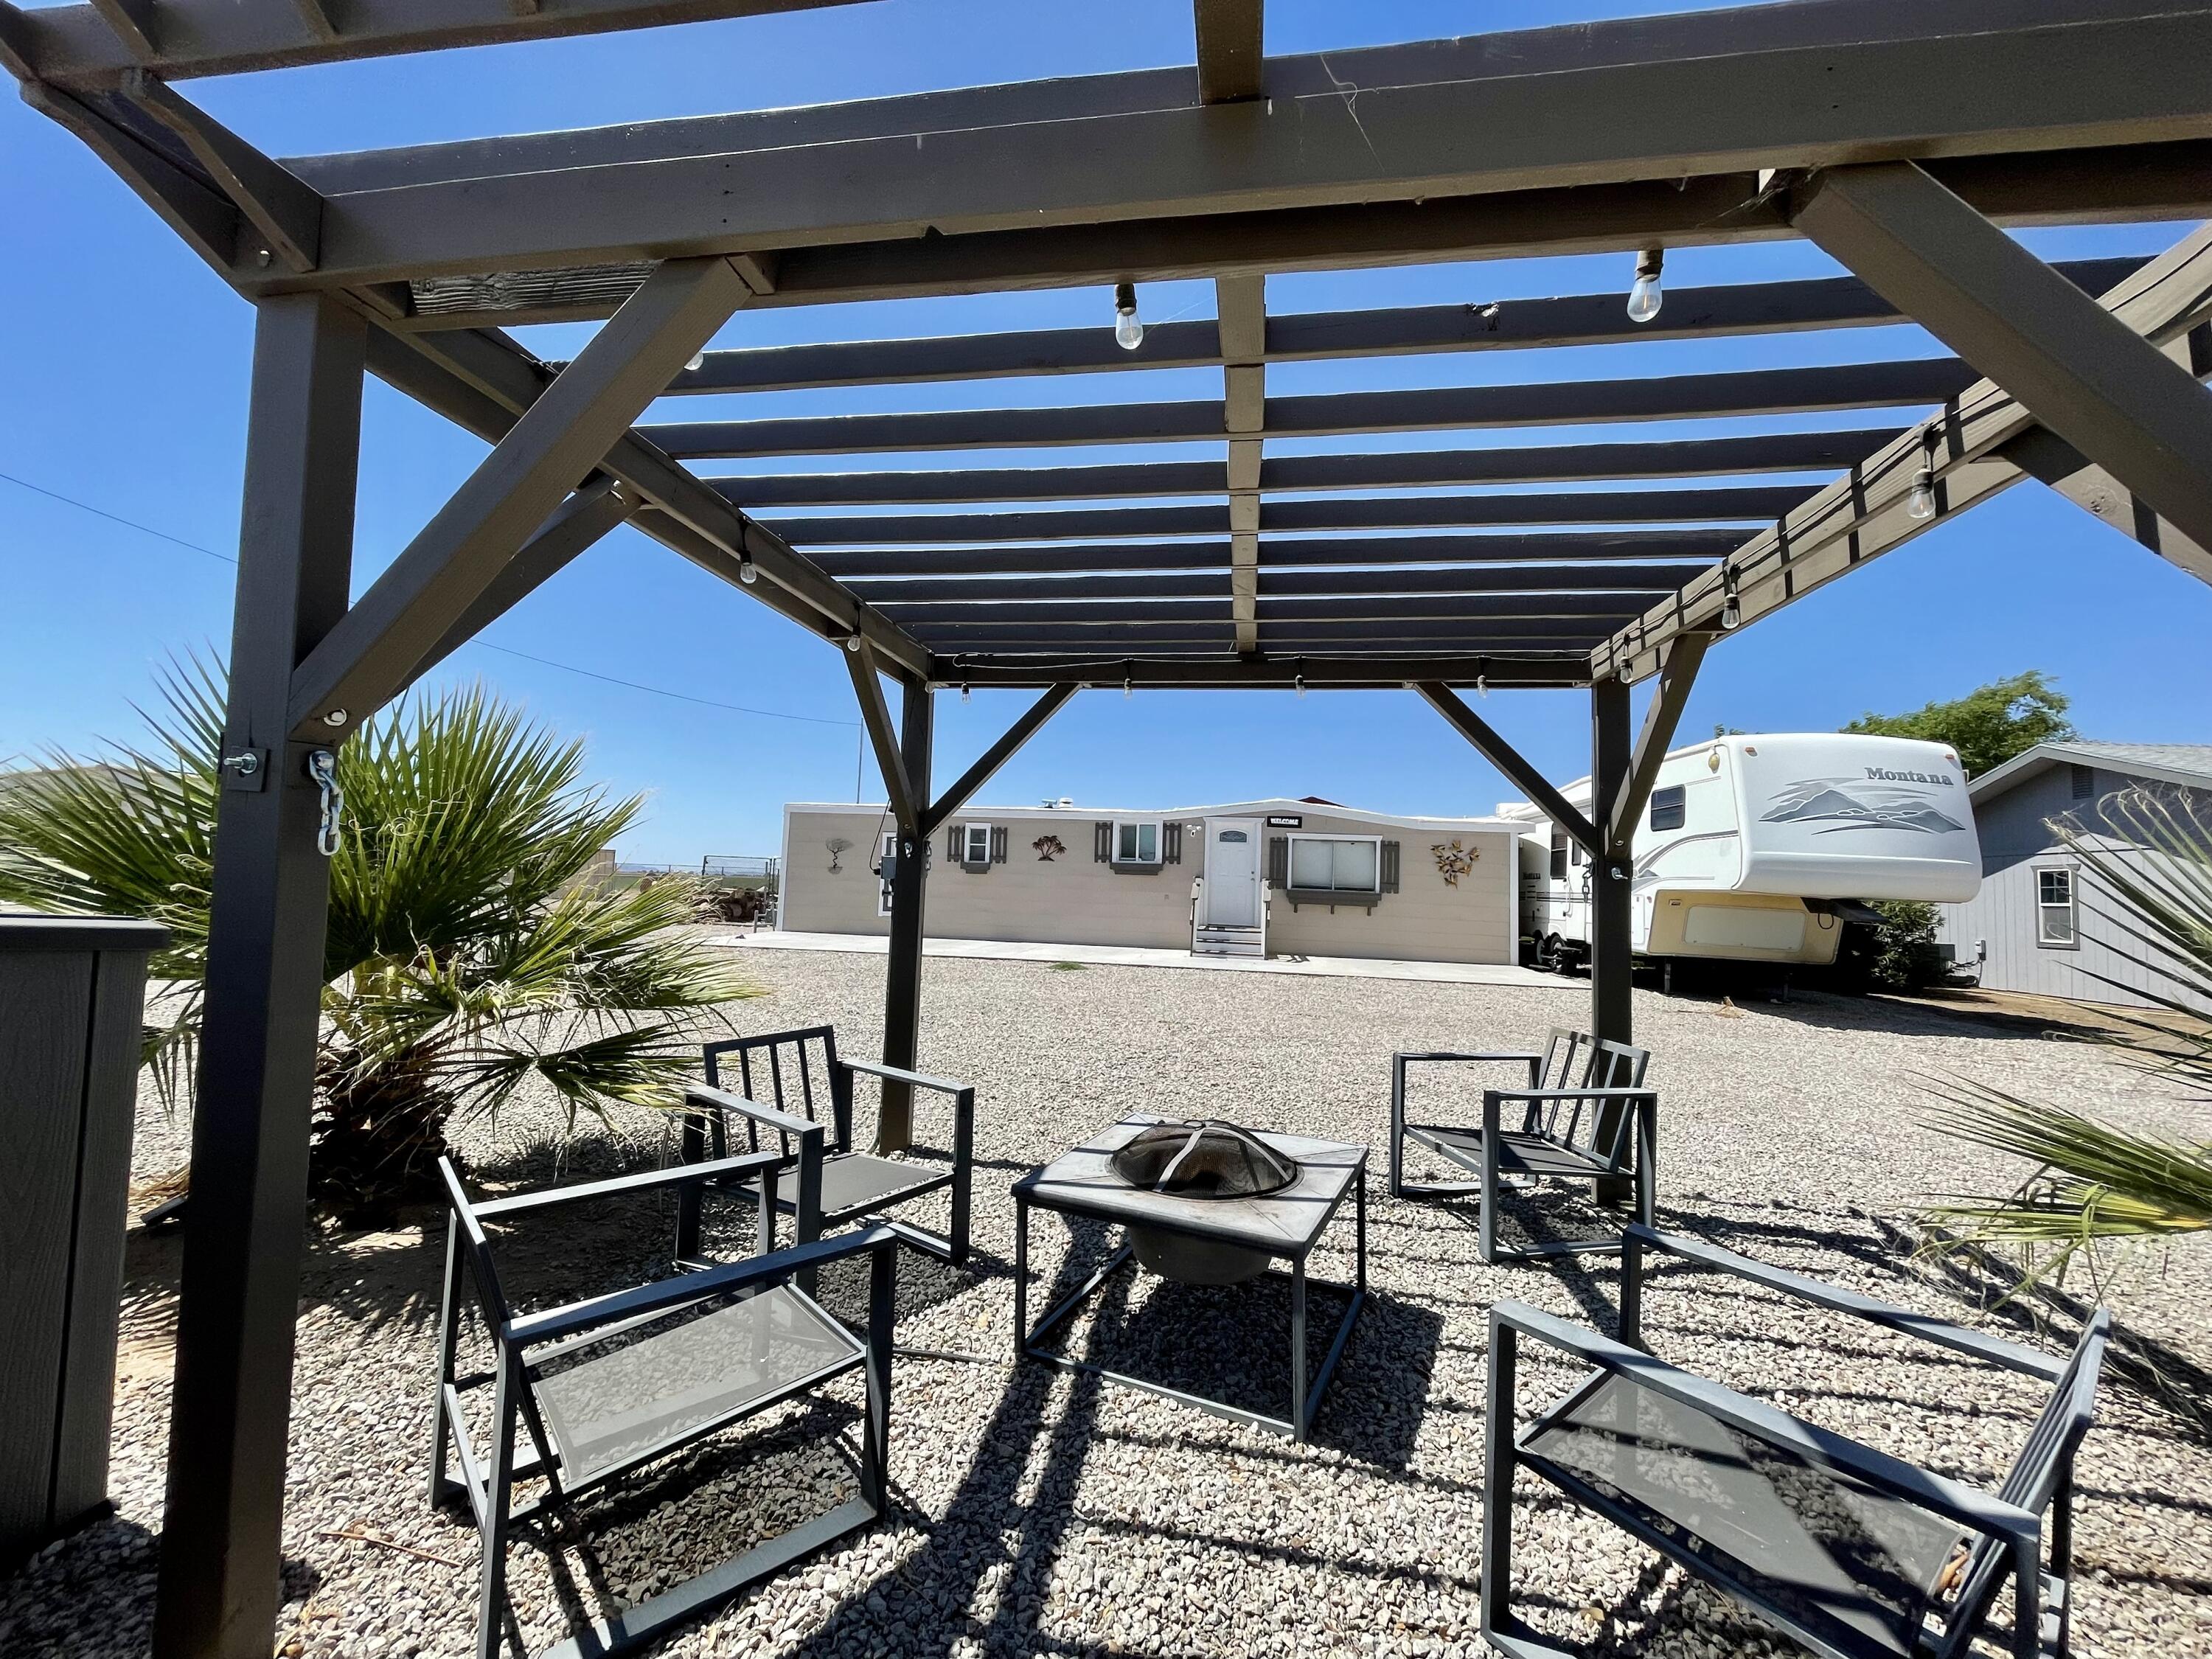 a view of a patio with table and chairs under an umbrella